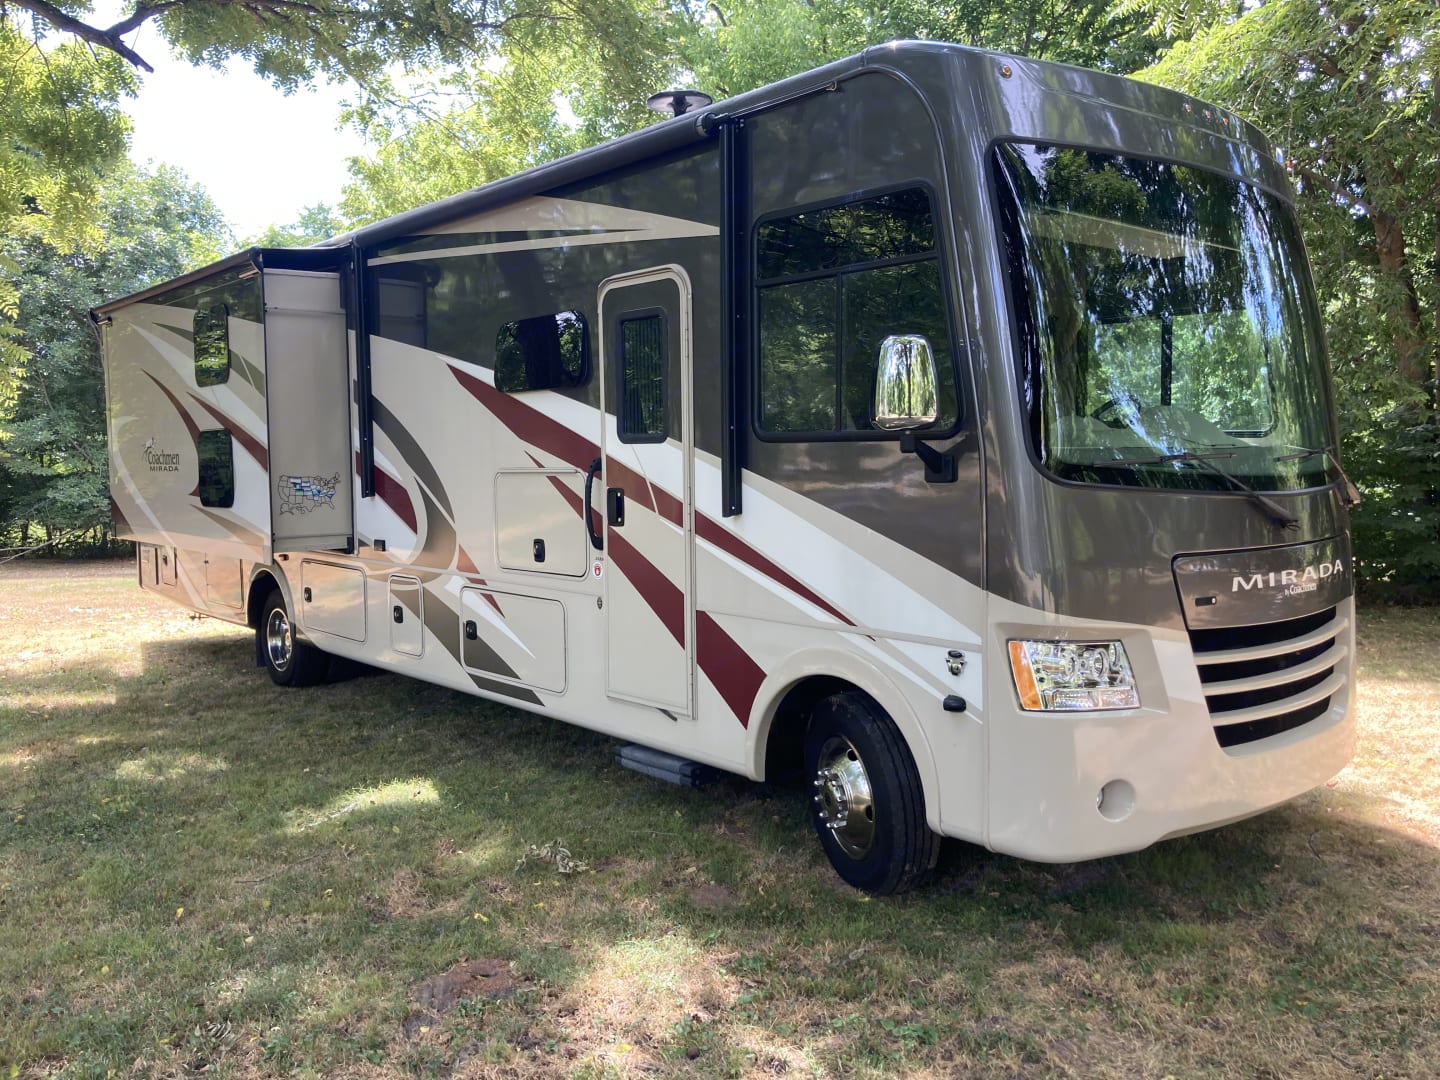 Class A RV for rent near Chattanooga